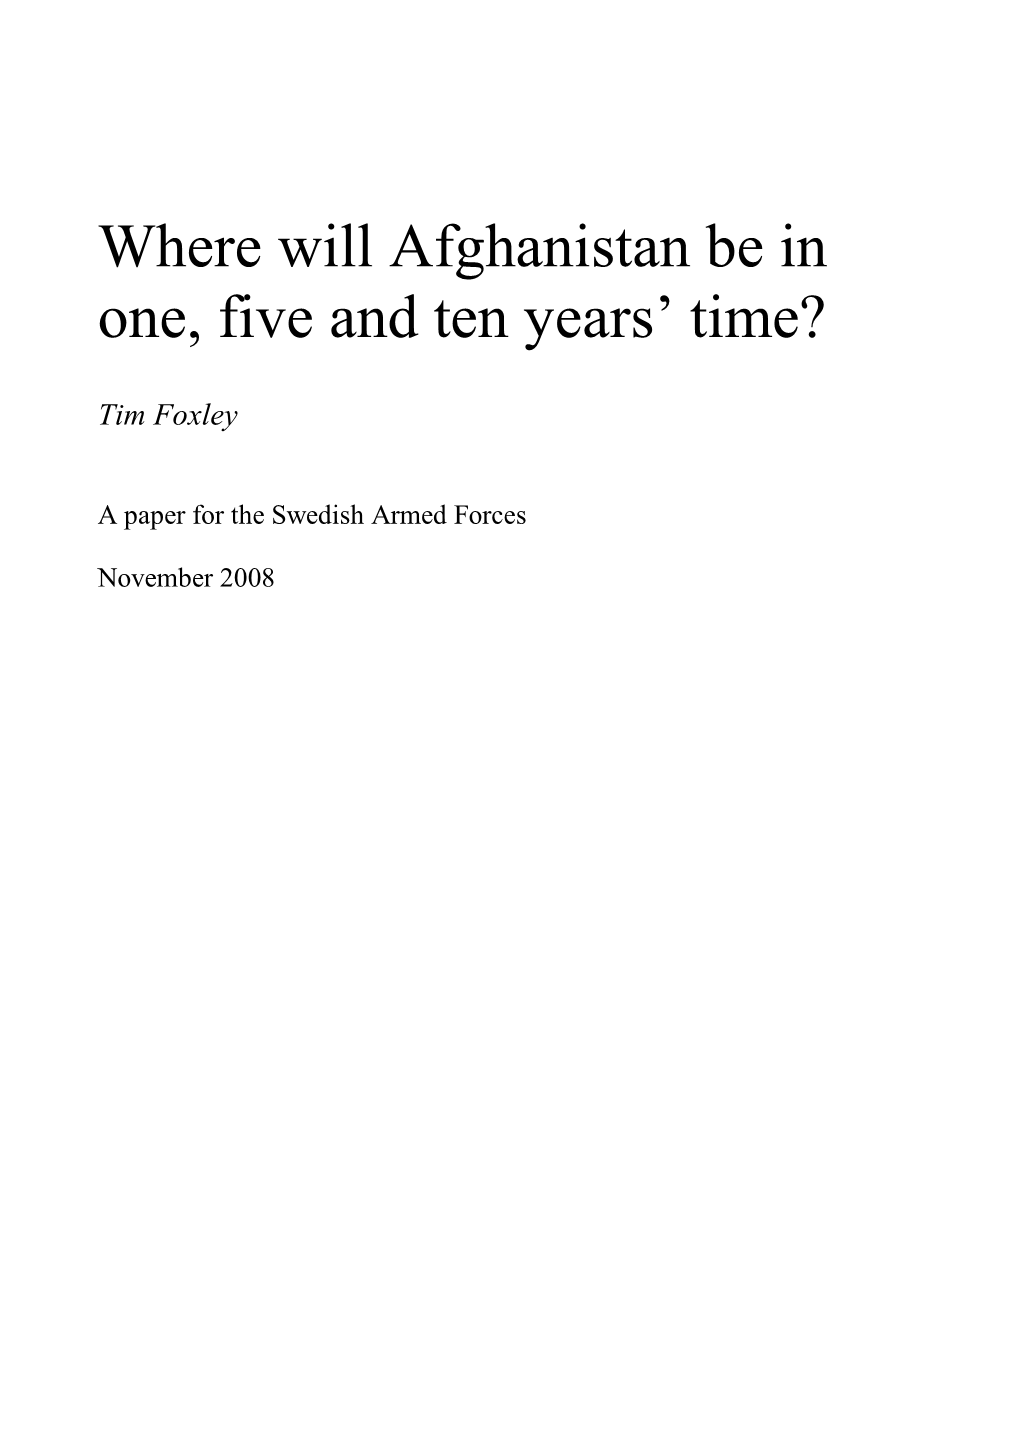 Where Will Afghanistan Be in One, Five and Ten Years' Time?